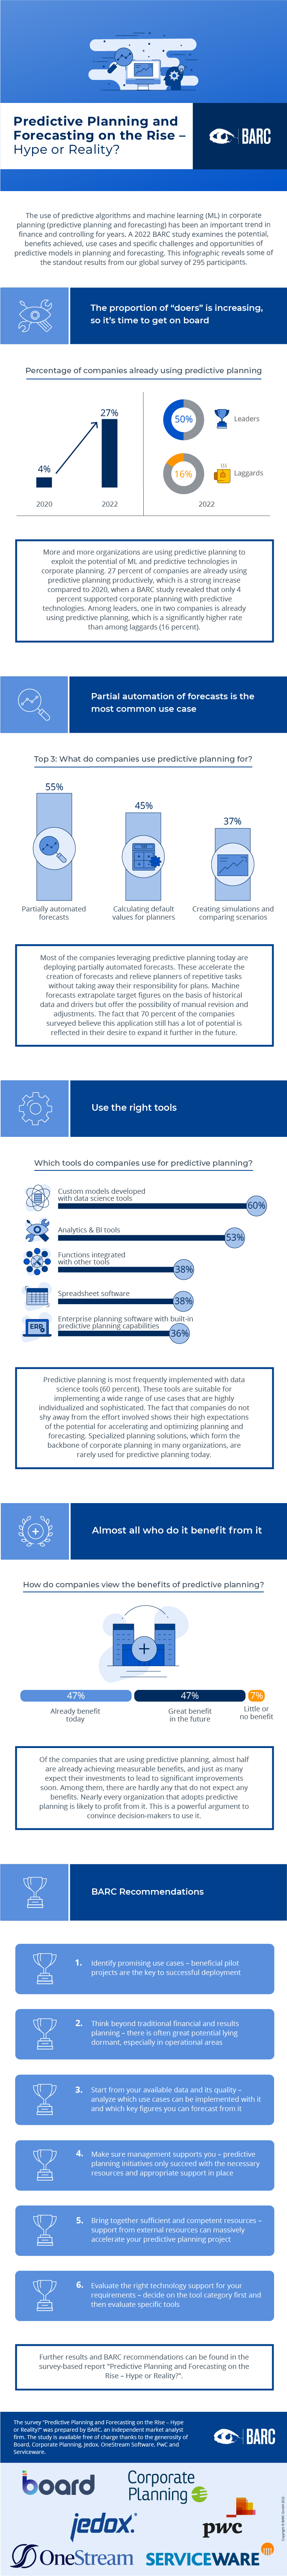 Predictive Planning and Forecasting Infographic